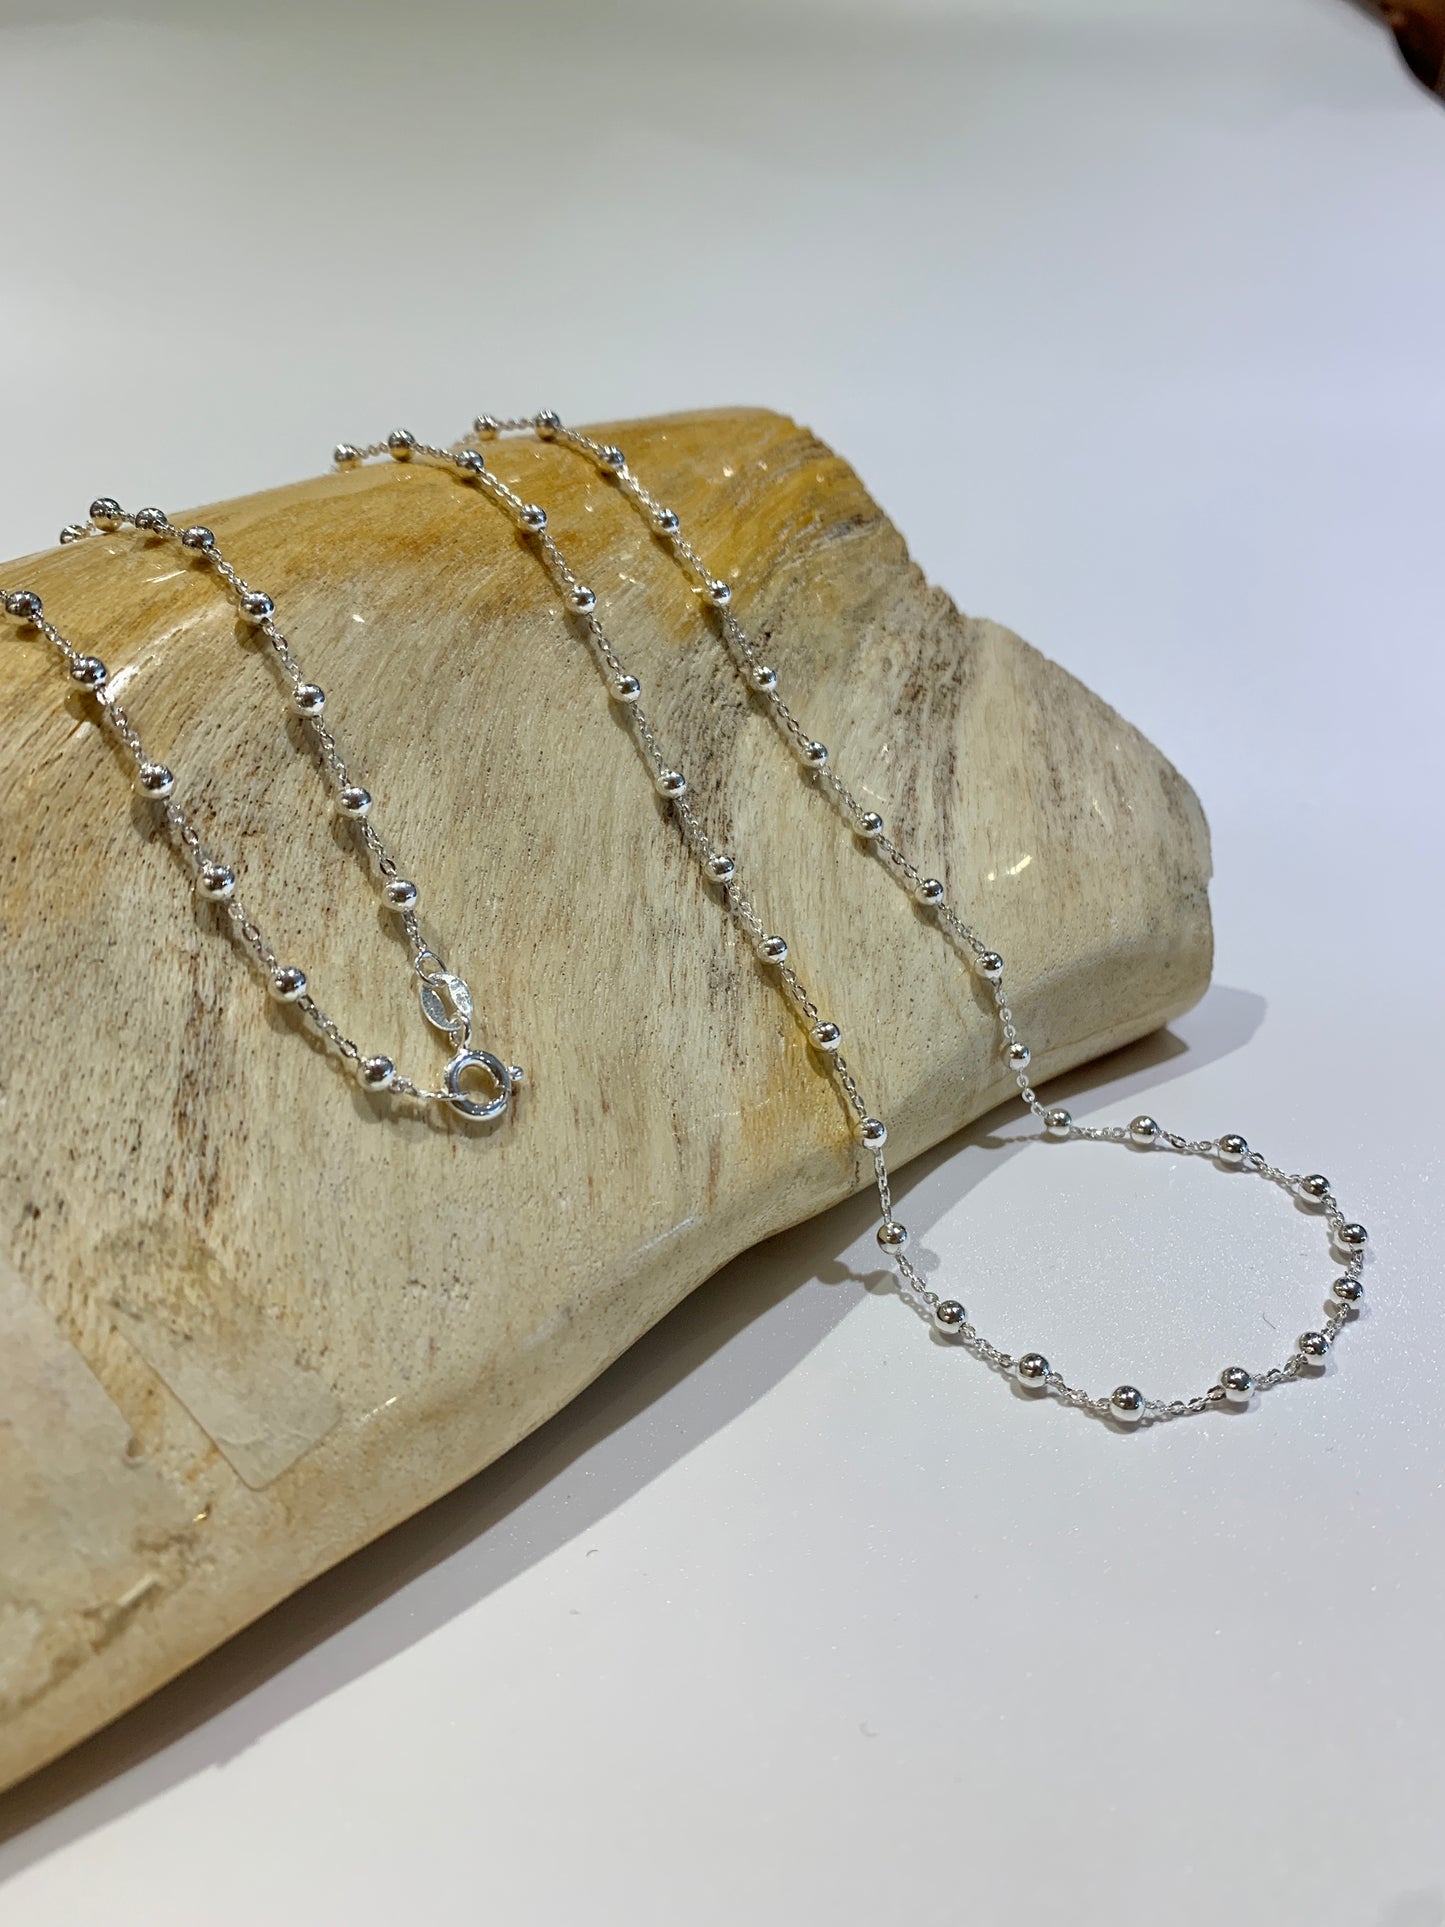 Silver Satellite Necklace - Chain link